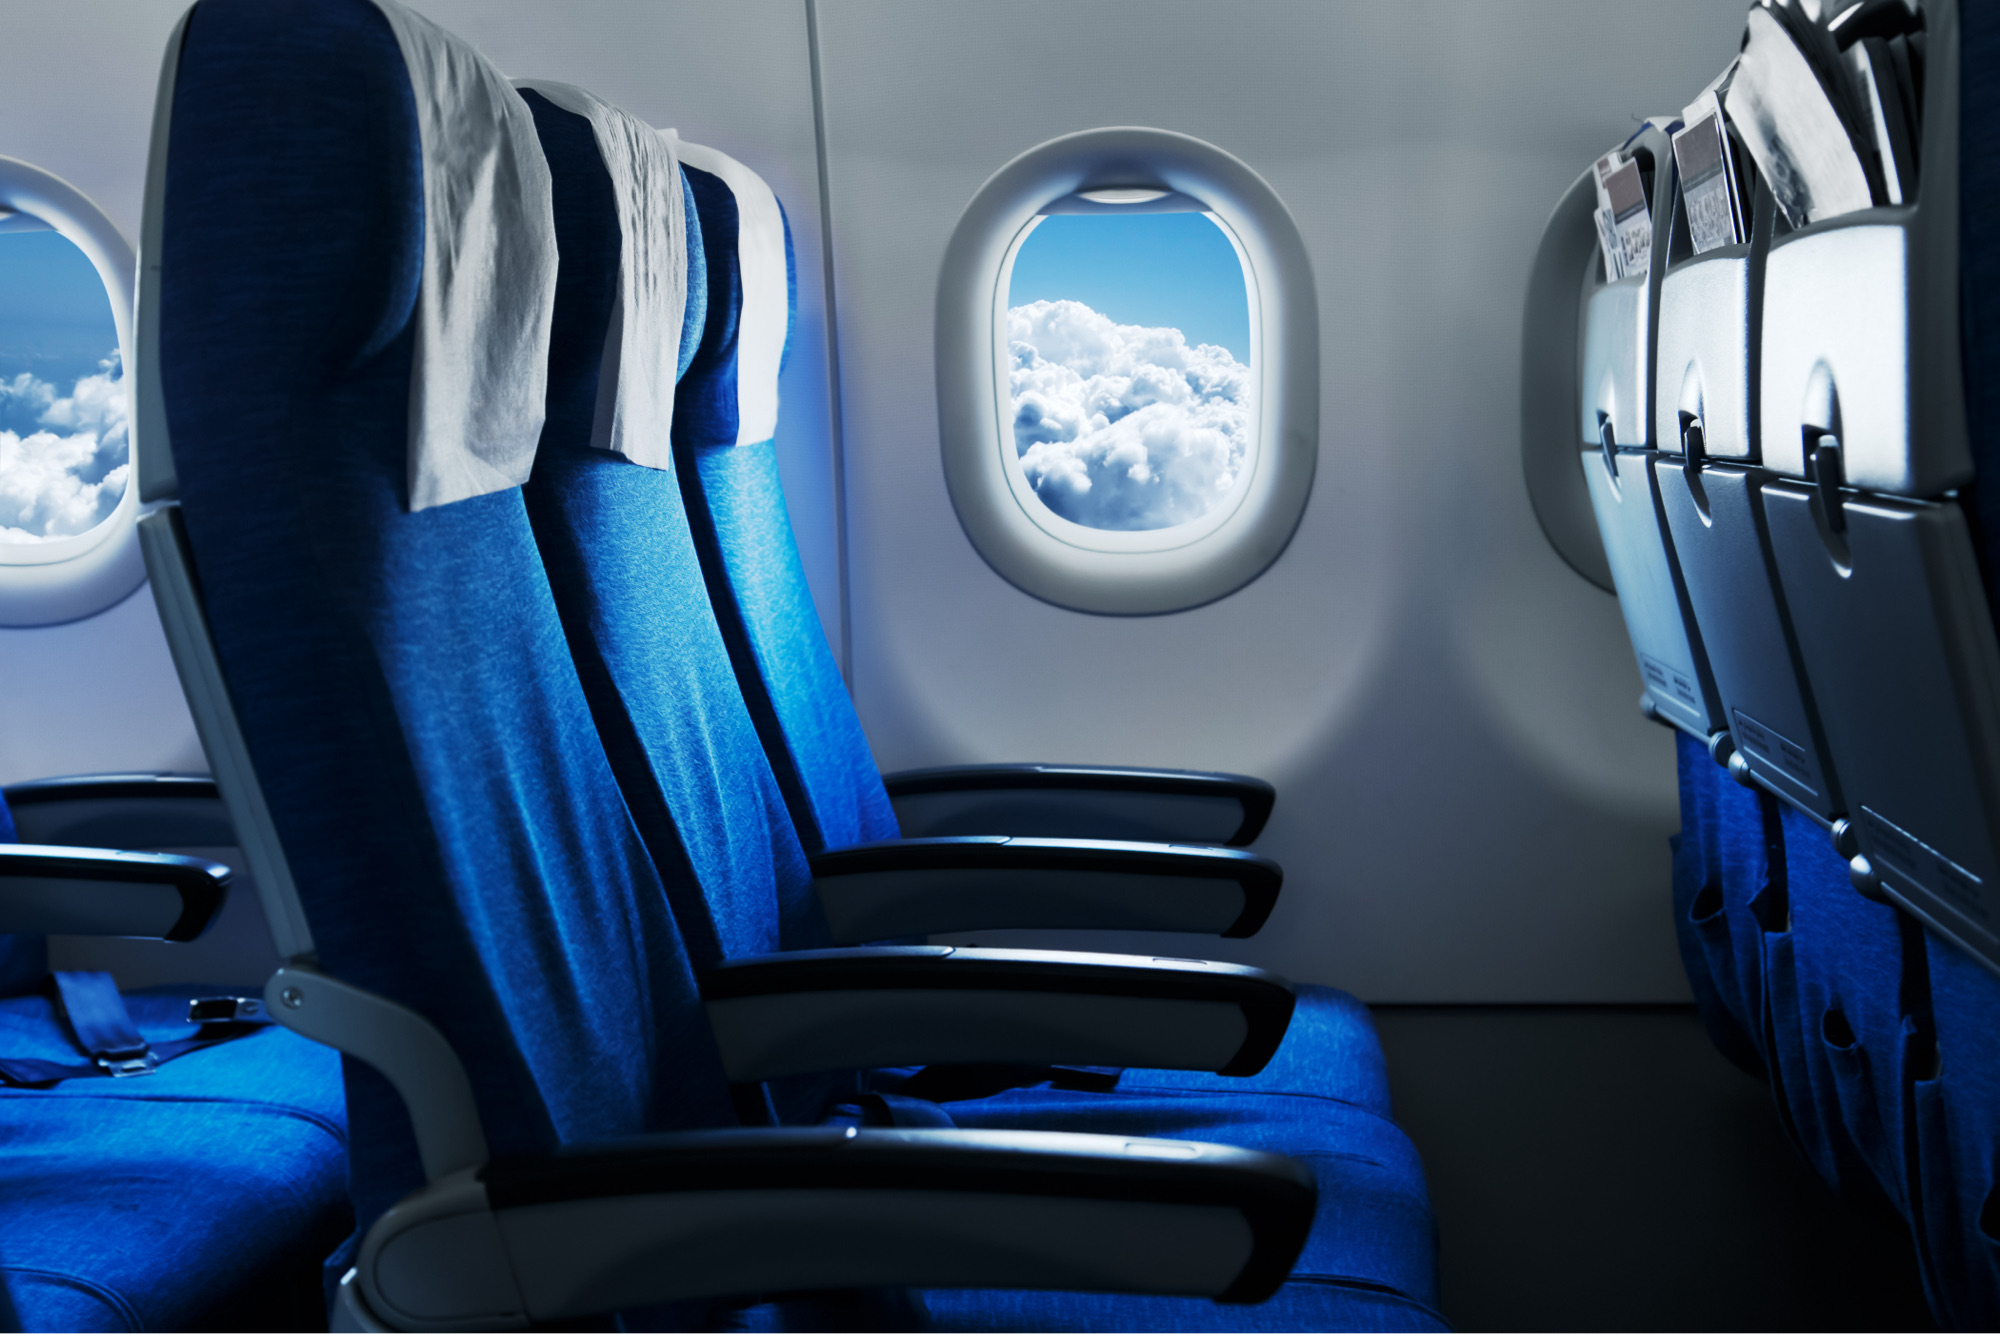 Photo of airplane seats with a window